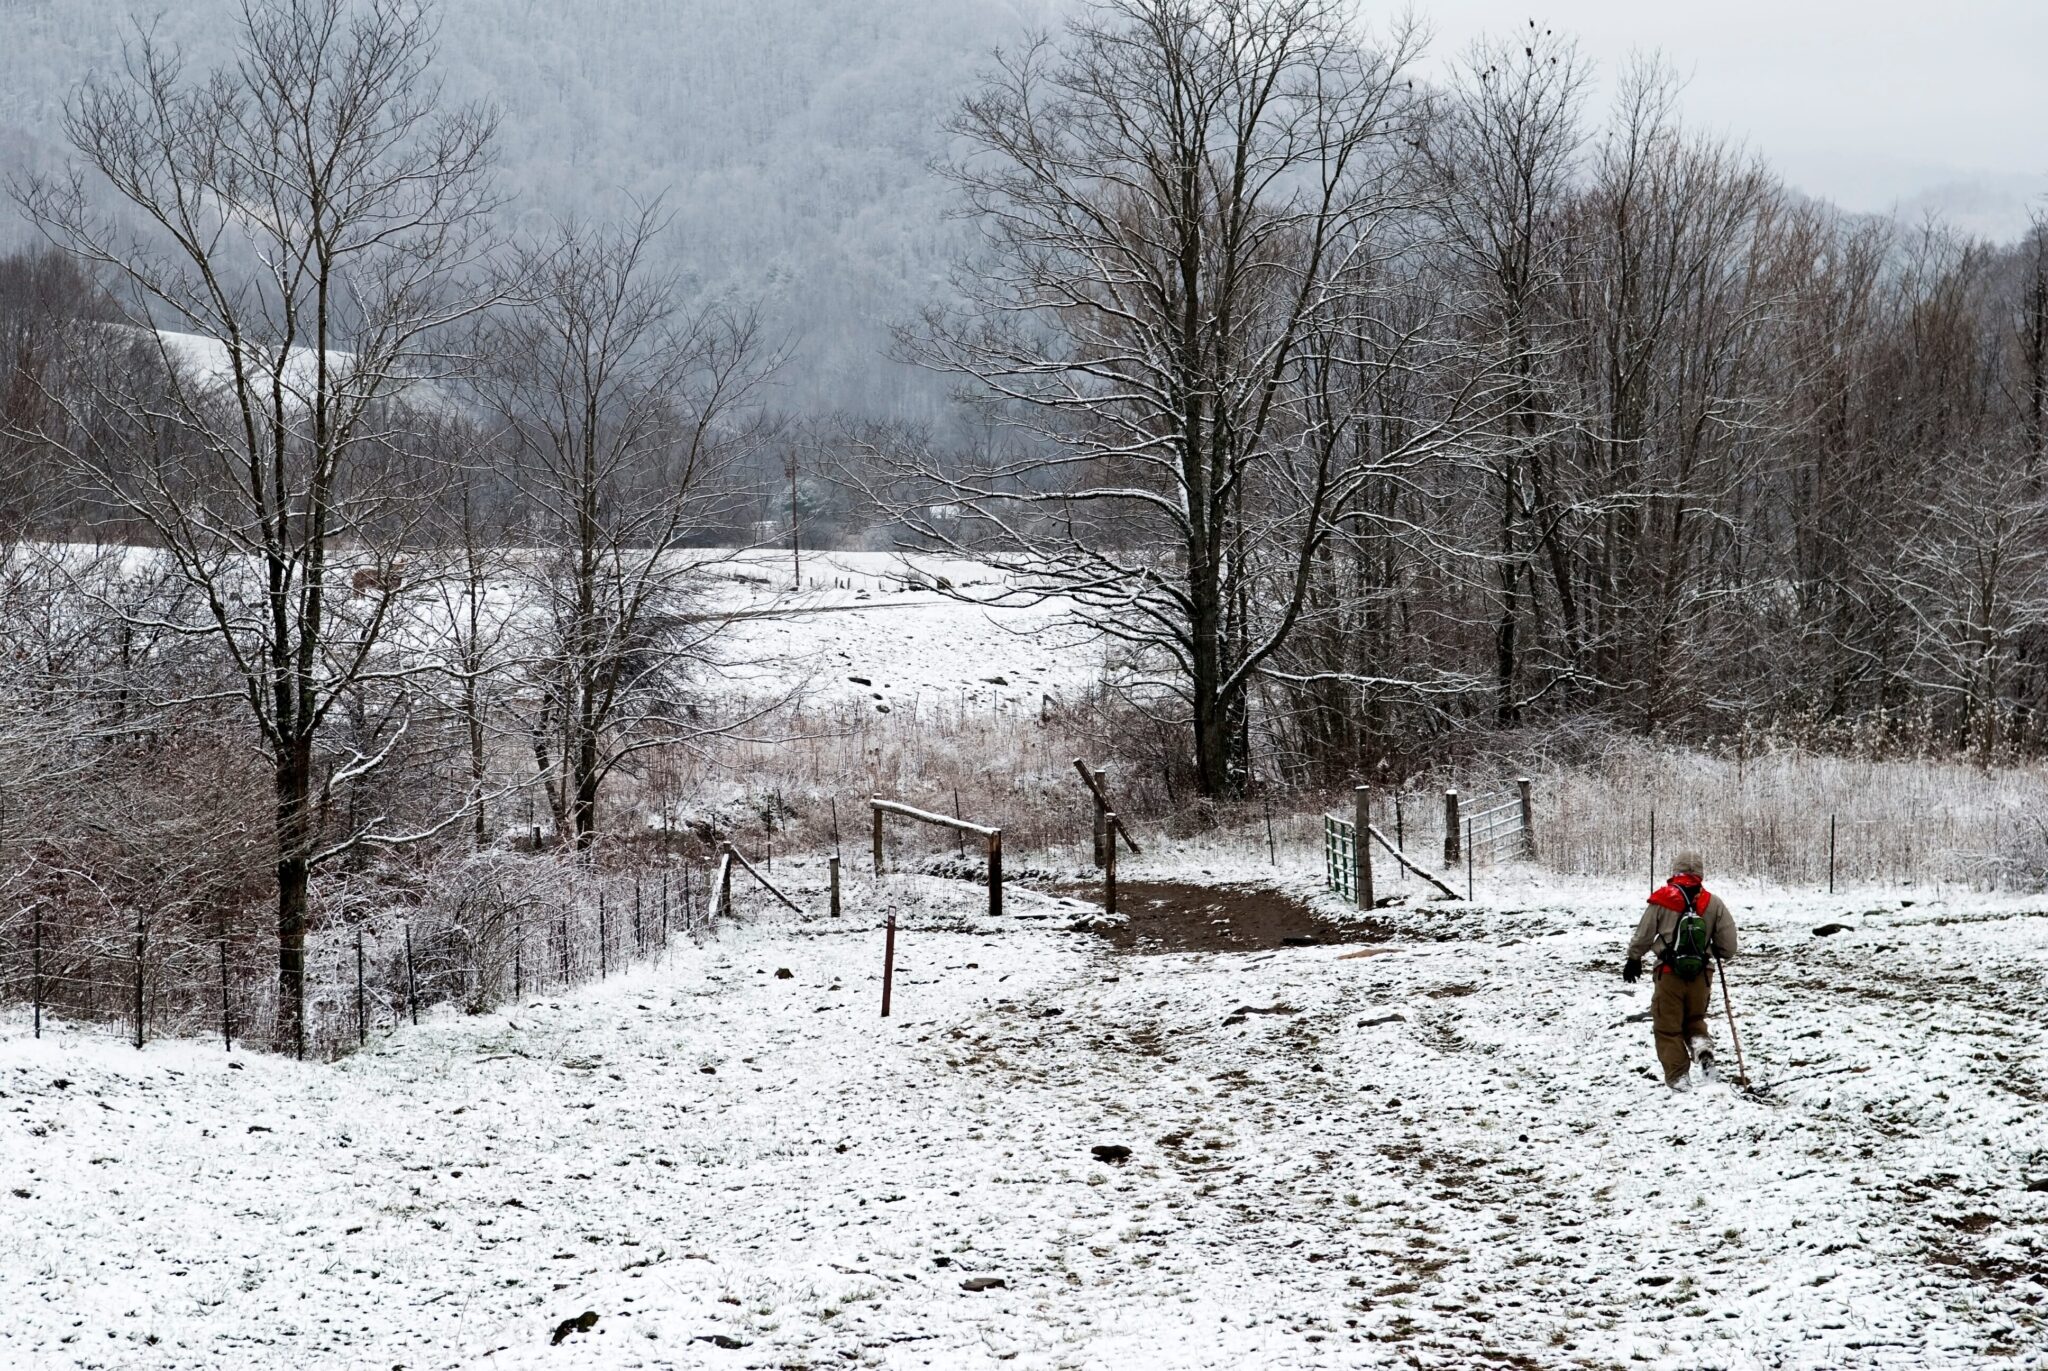 An individual leisurely walks down a wintry trail surrounded by a picturesque woodland setting